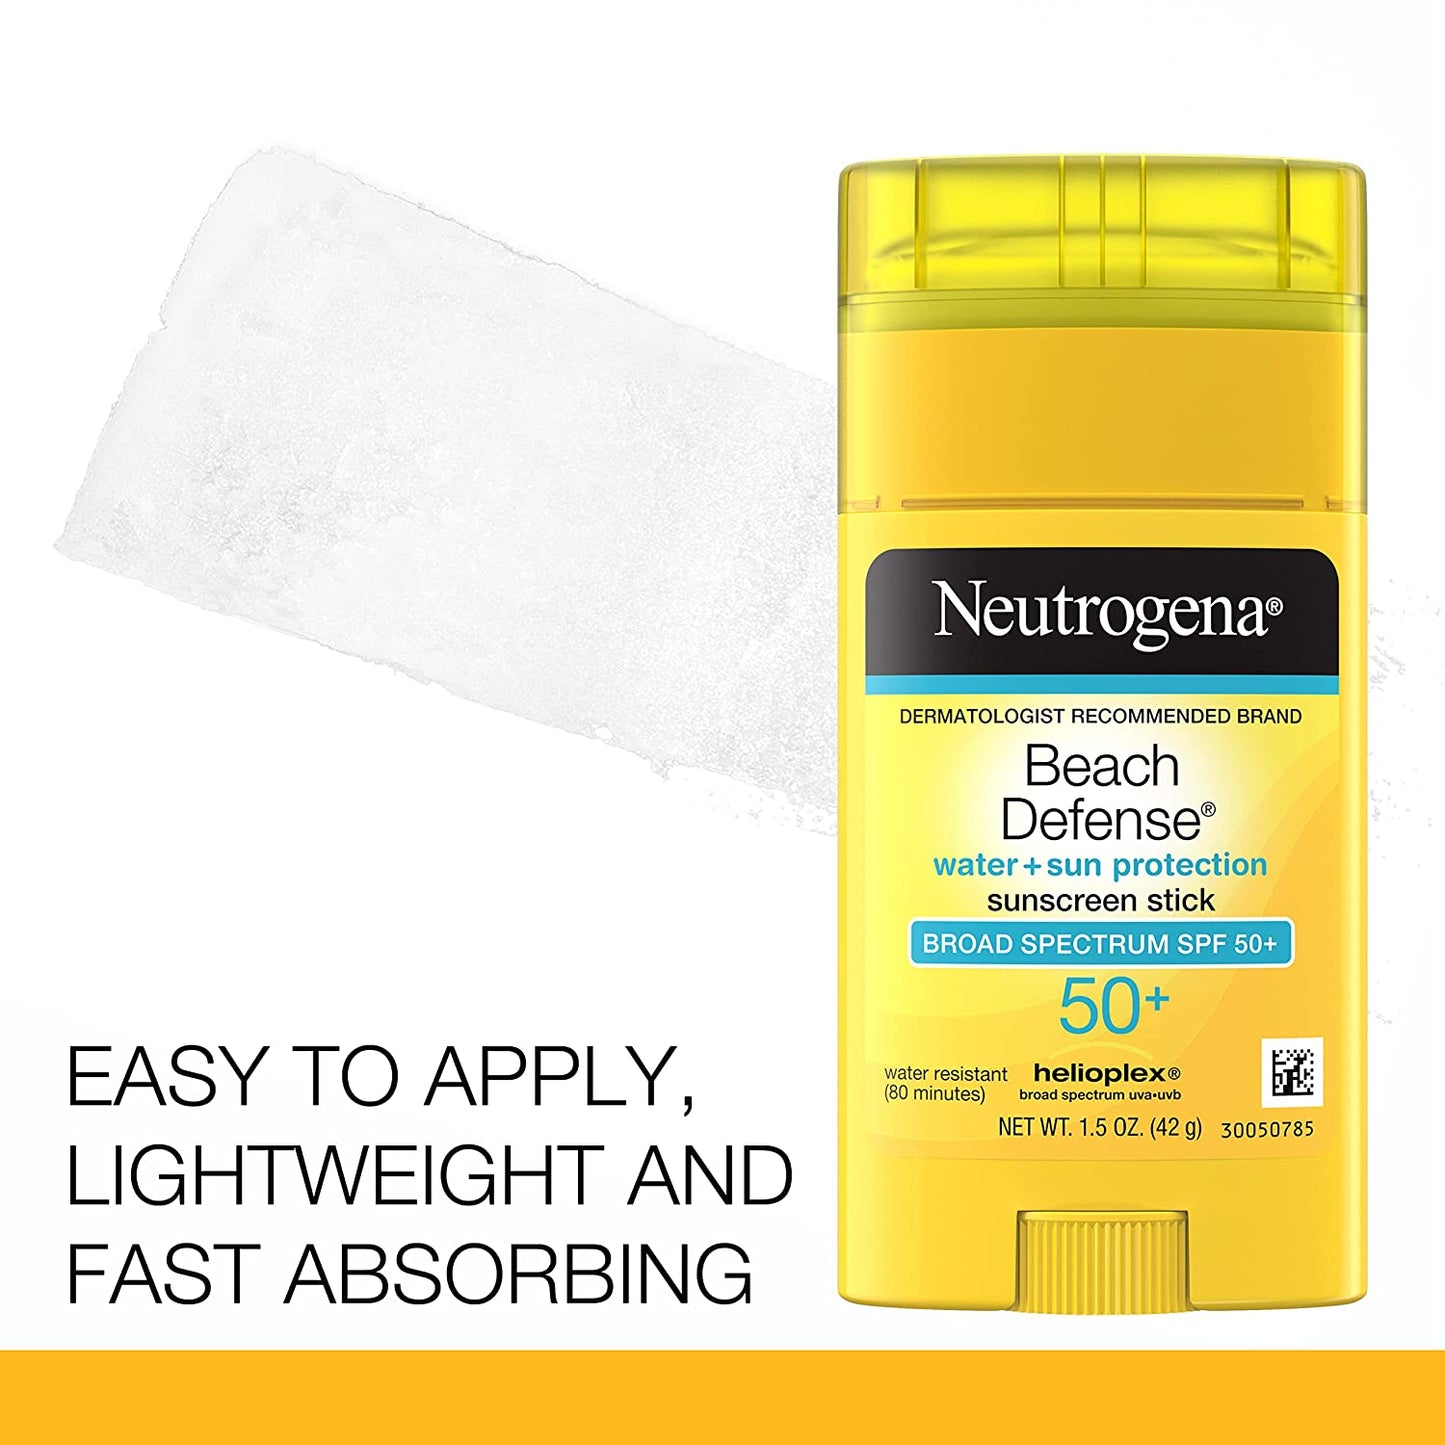 Neutrogena Beach Defense Sunscreen Stick with Broad Spectrum SPF 50+, Lightweight Water-Resistant Sunscreen with Oil-Free & Paba-Free Formula, 1.5 Oz